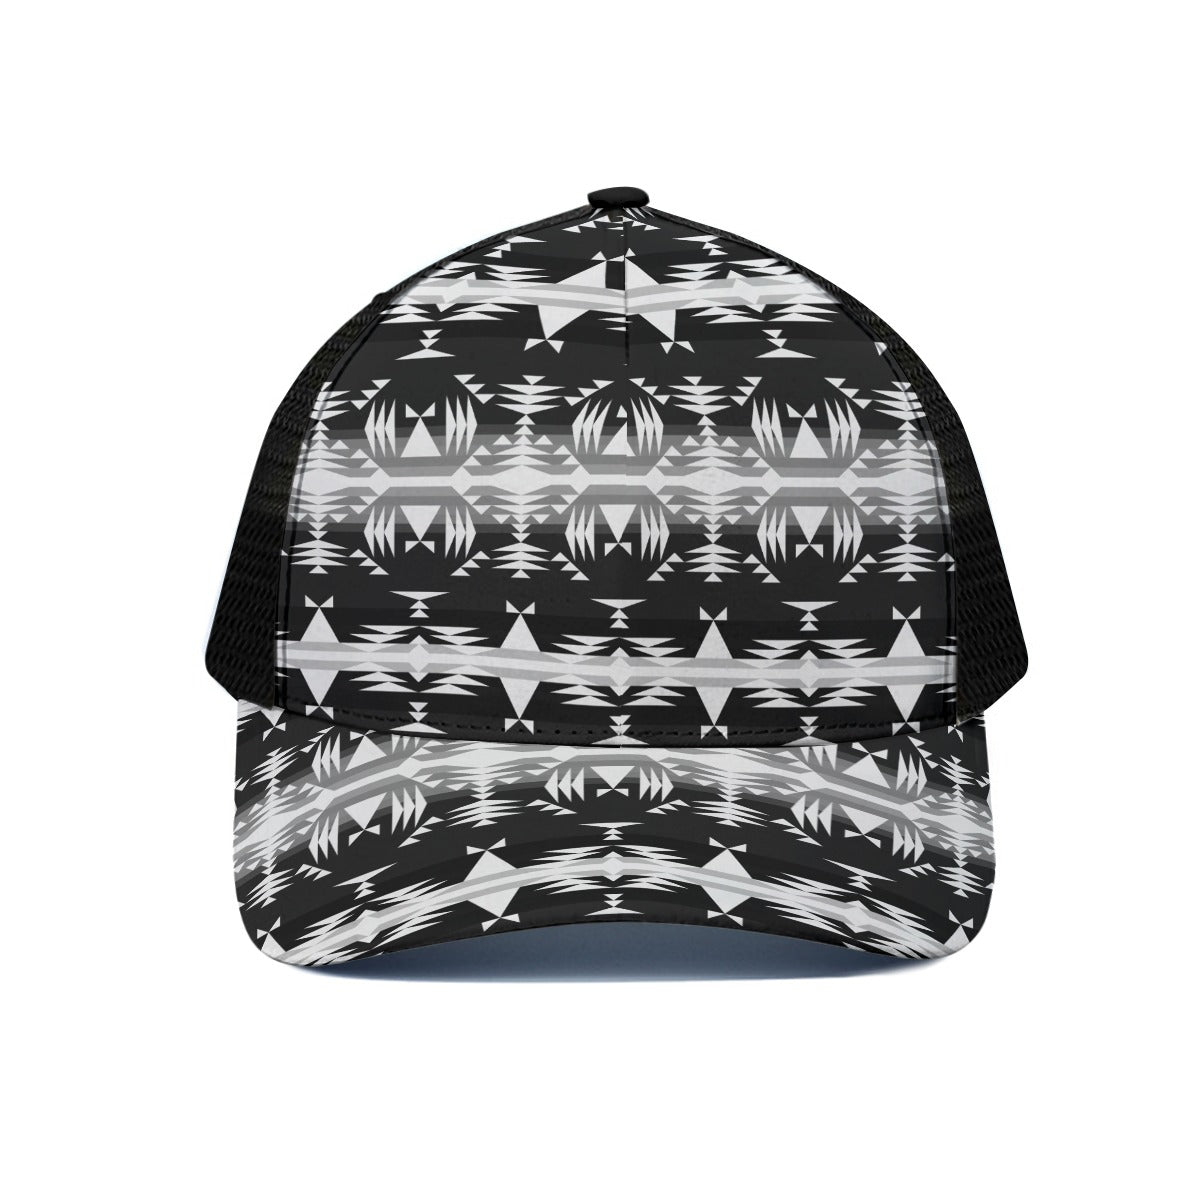 Between The Mountains Black and White Snapback Hat